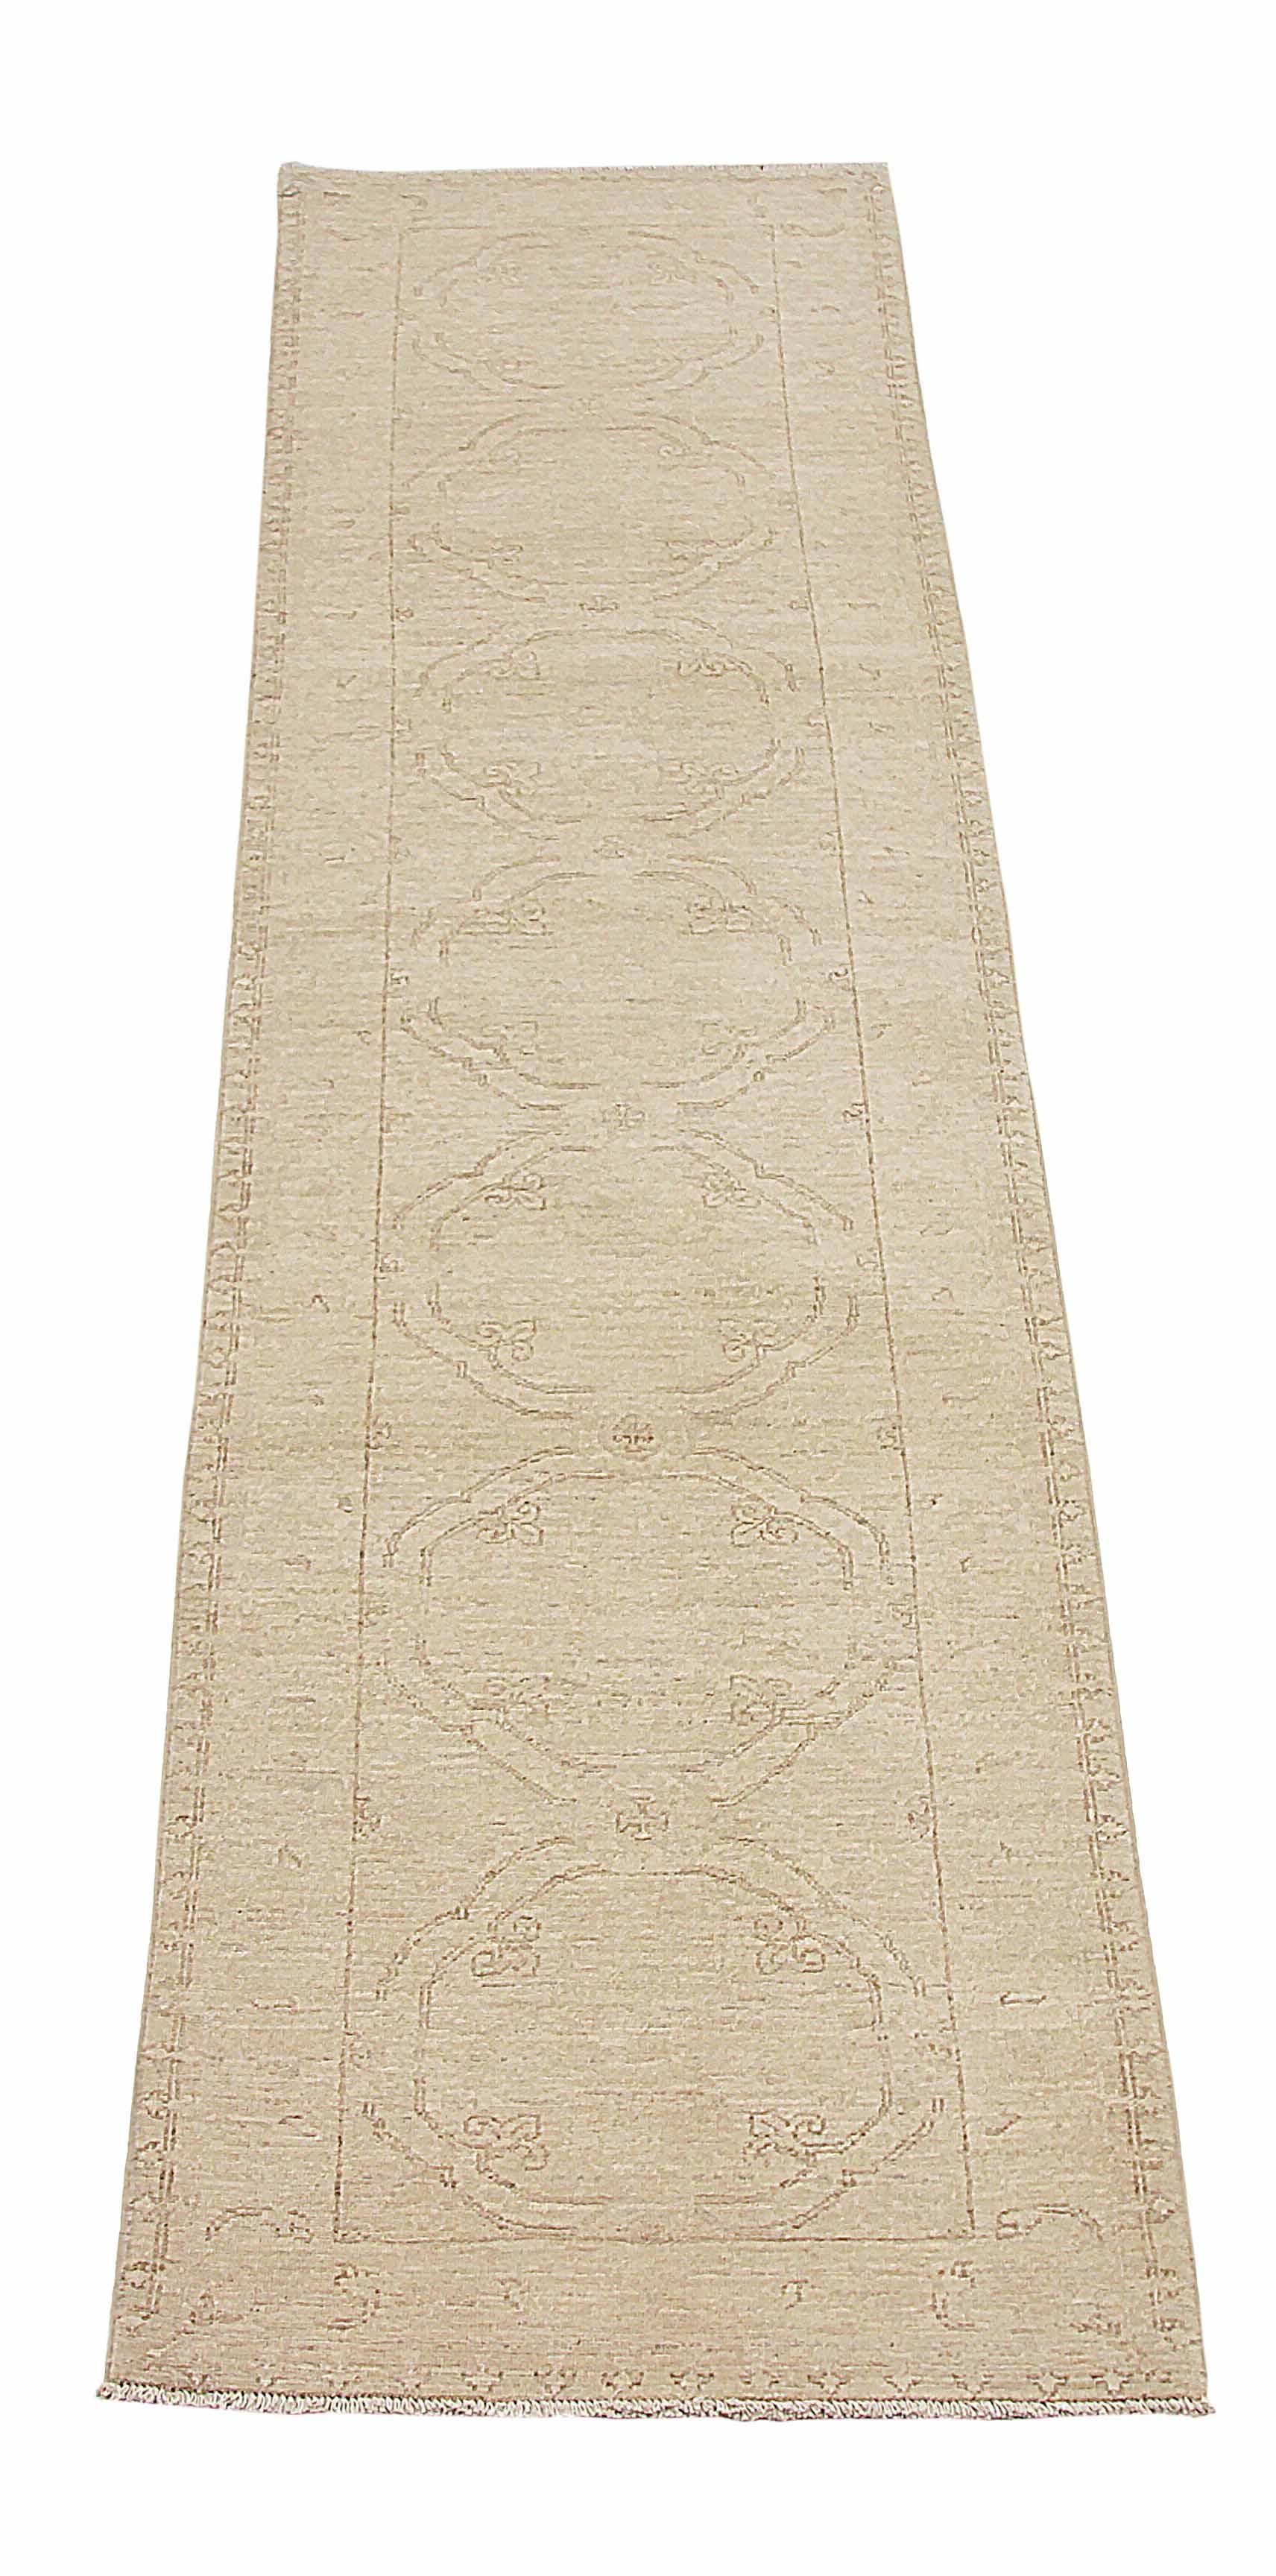 Afghan runner rug handwoven from the finest sheep’s wool. It’s colored with all-natural vegetable dyes that are safe for humans and pets. It’s a traditional Tabriz design handwoven by expert artisans. It’s a lovely runner rug that can be